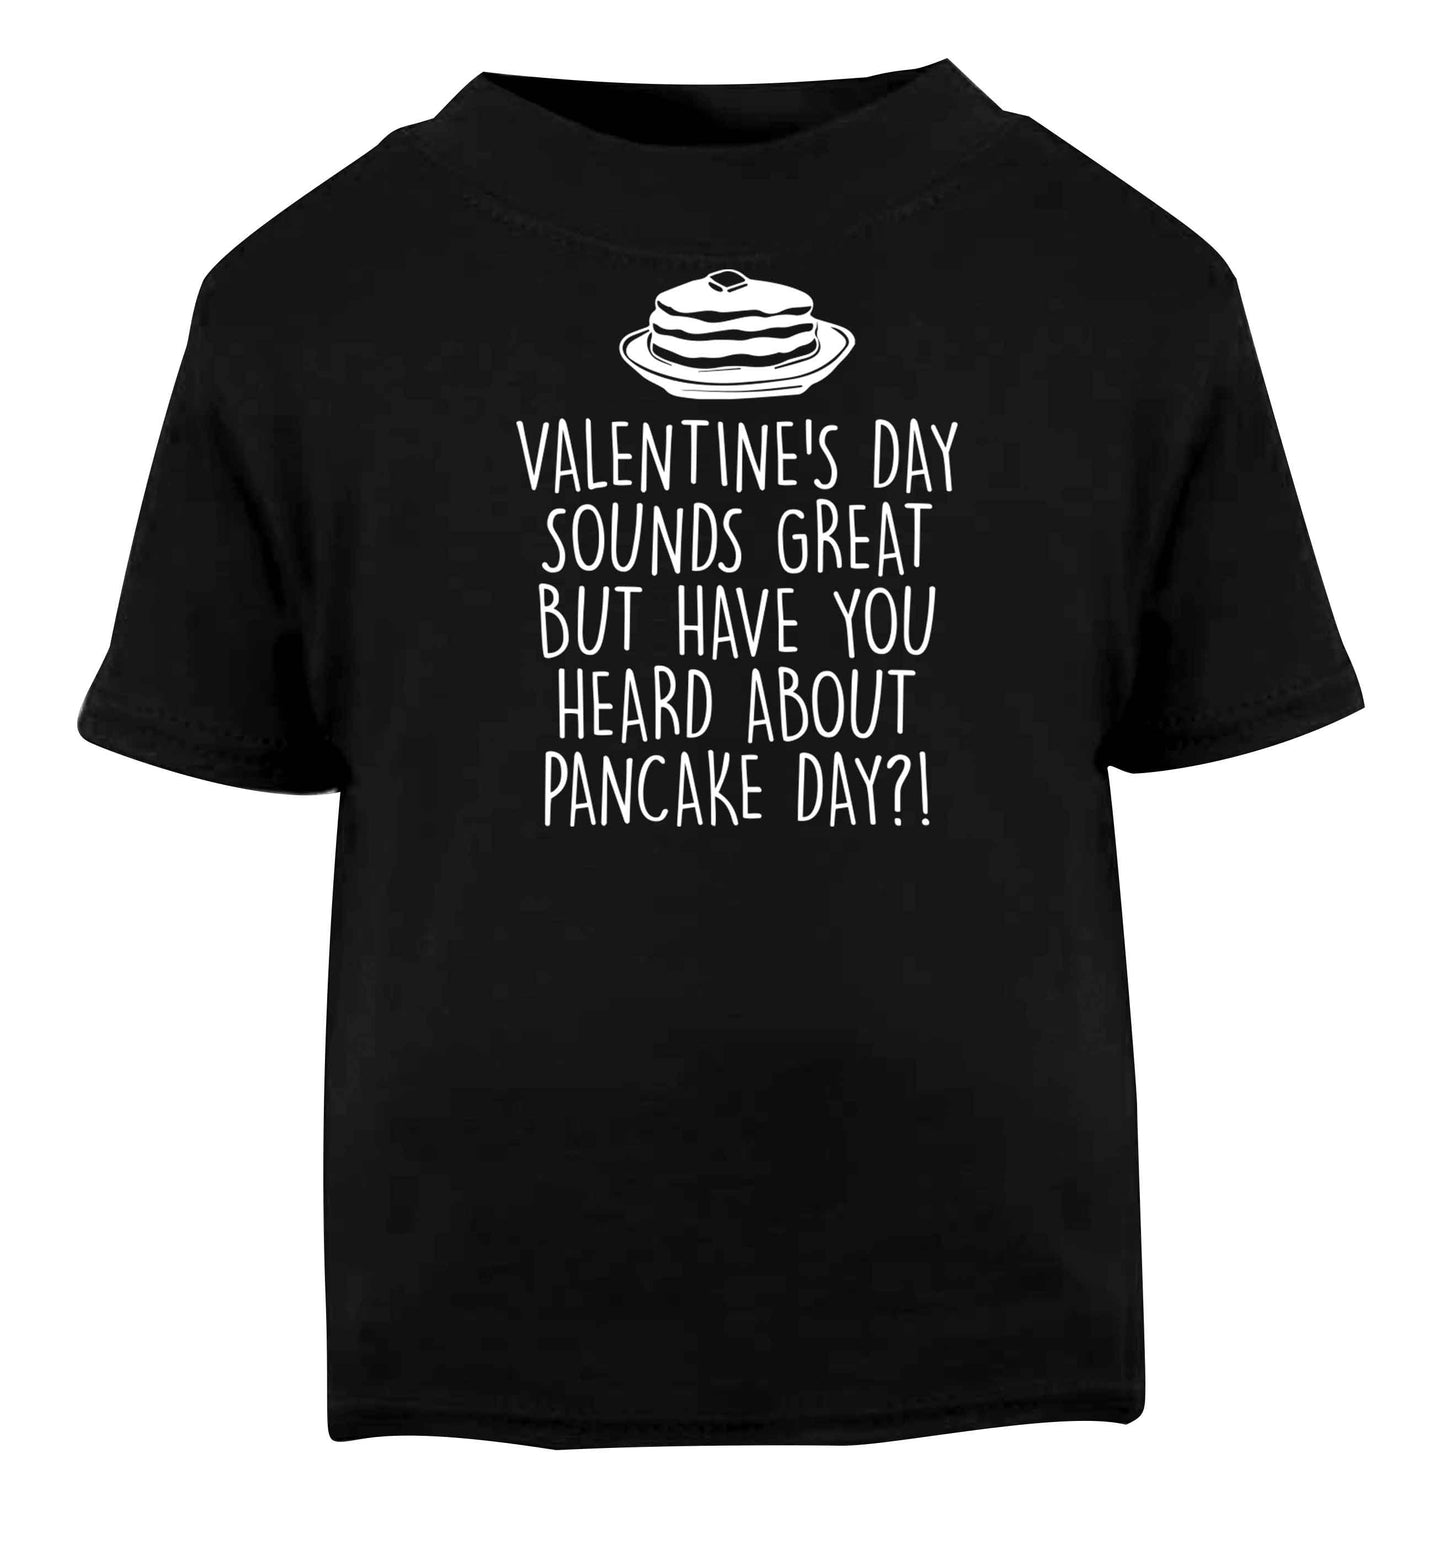 Valentine's day sounds great but have you heard about pancake day?! Black baby toddler Tshirt 2 years